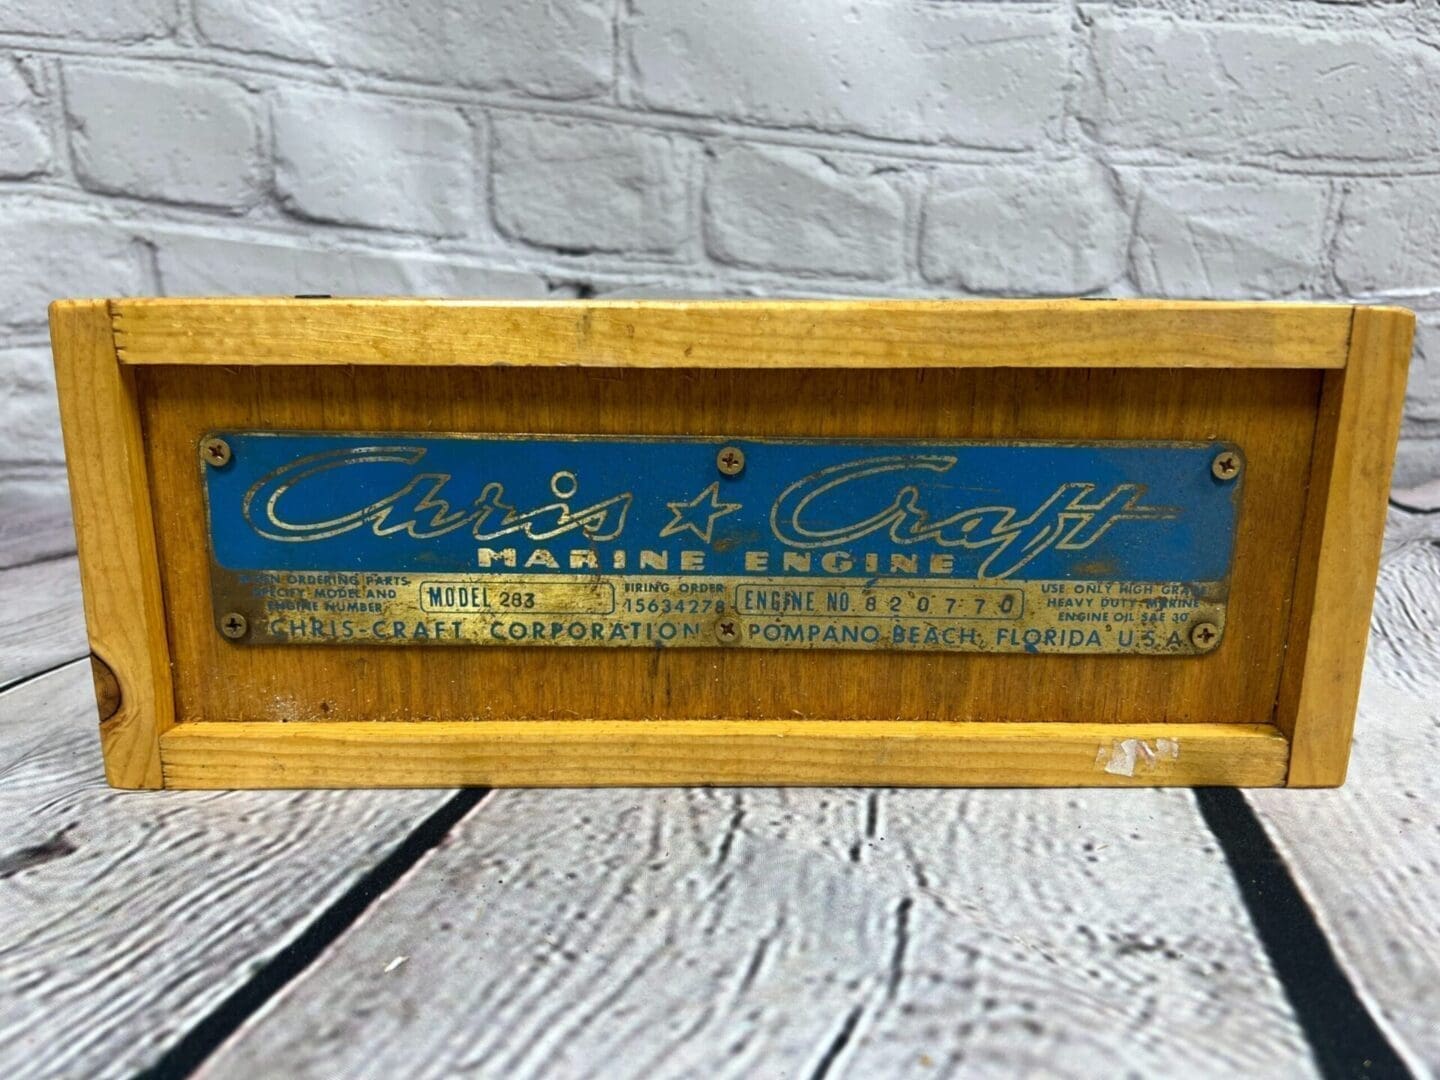 A wooden box with the name of an old boat.